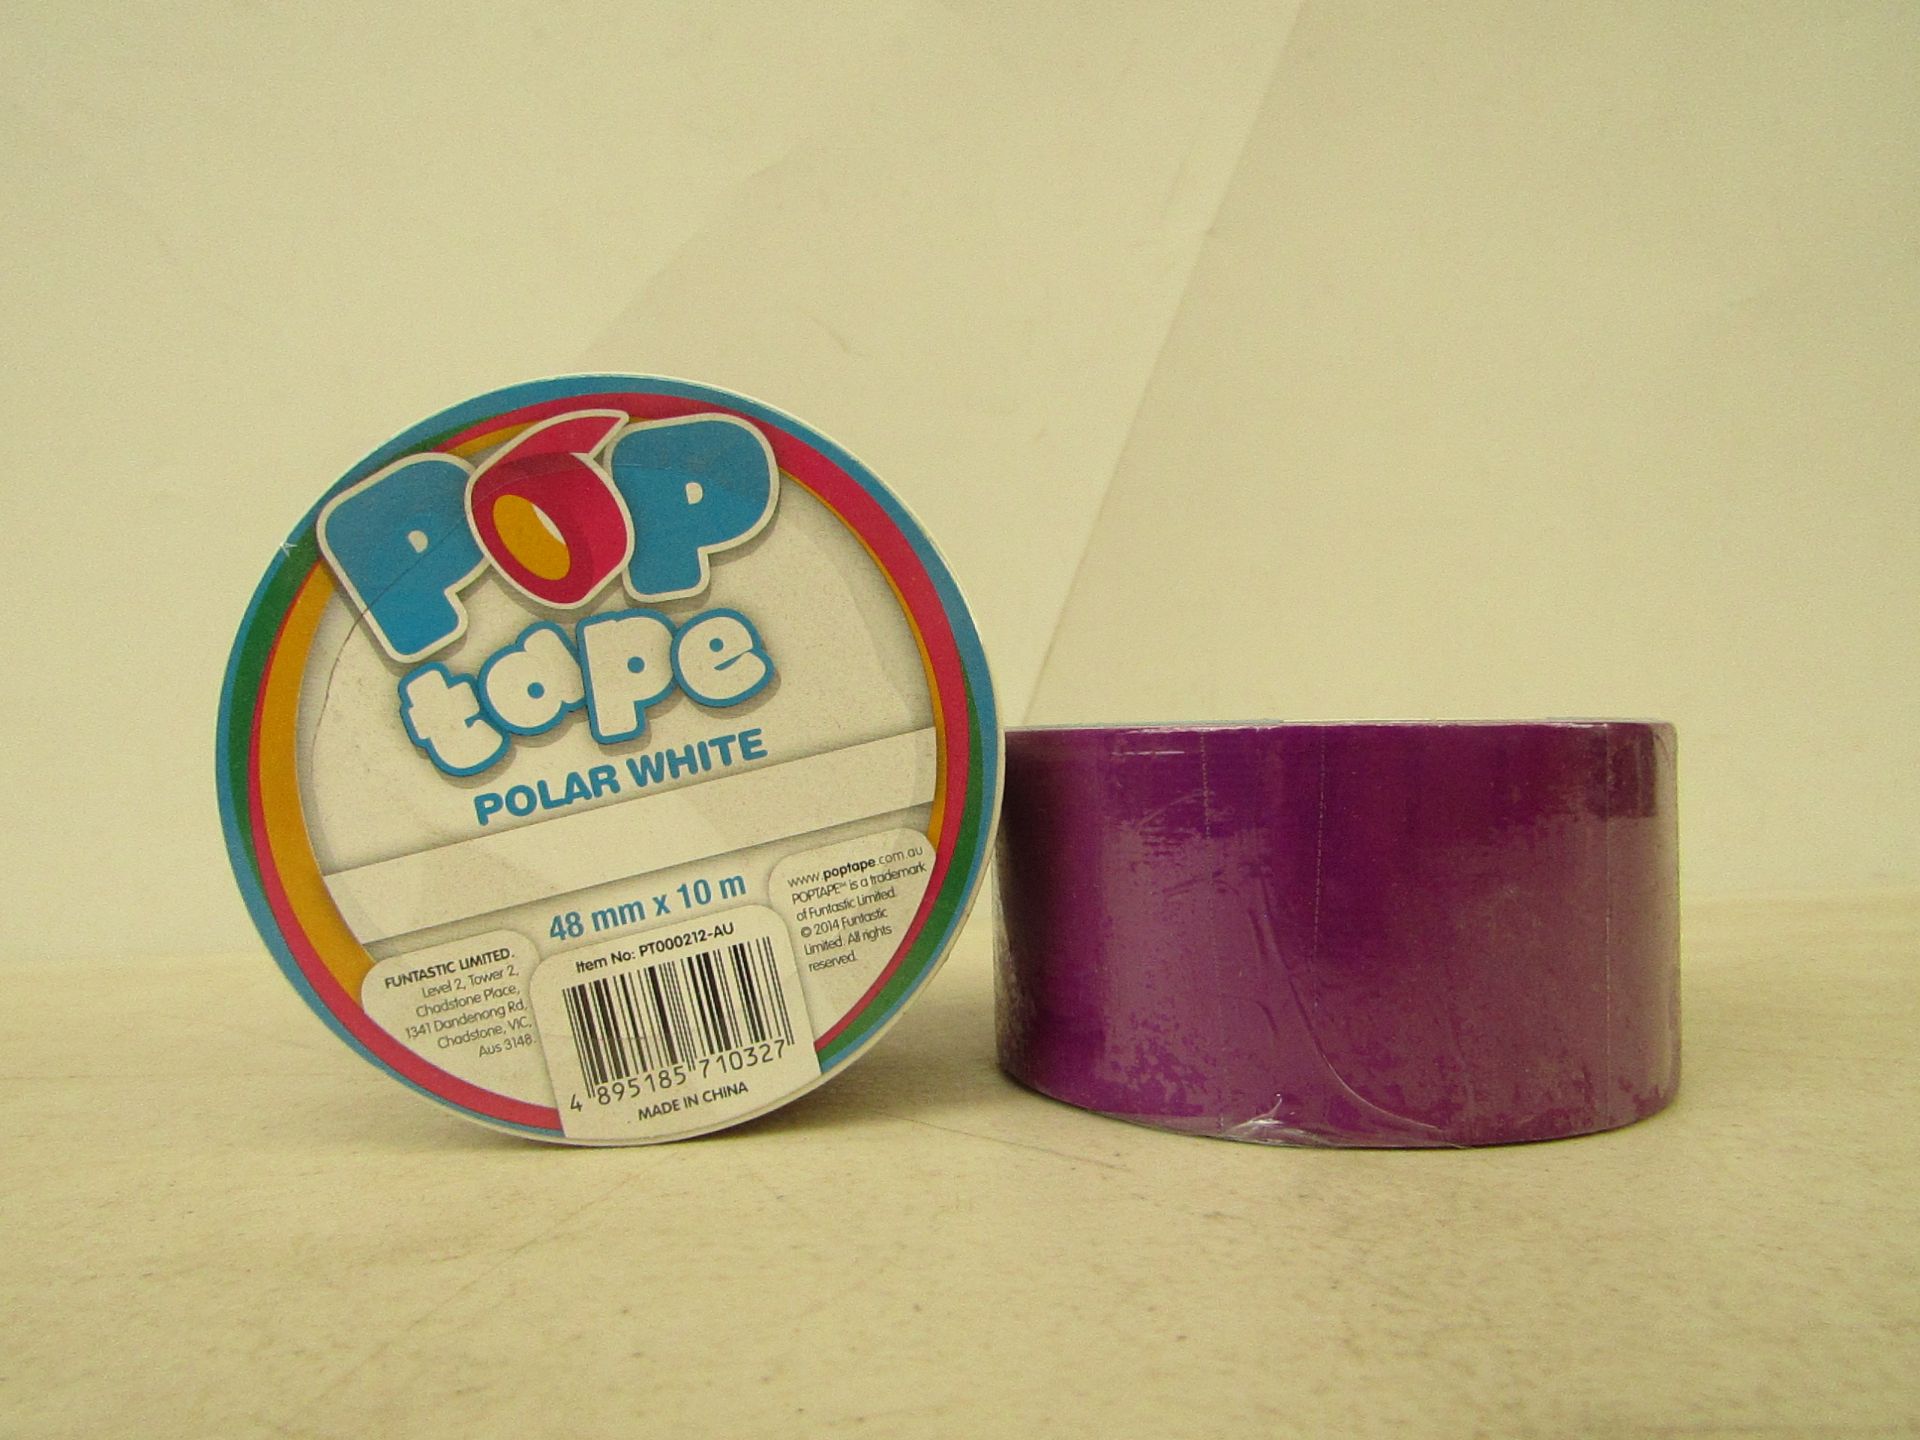 Box of 12x various colour and design pop tape, Total RRP £36.00, new in packaging.